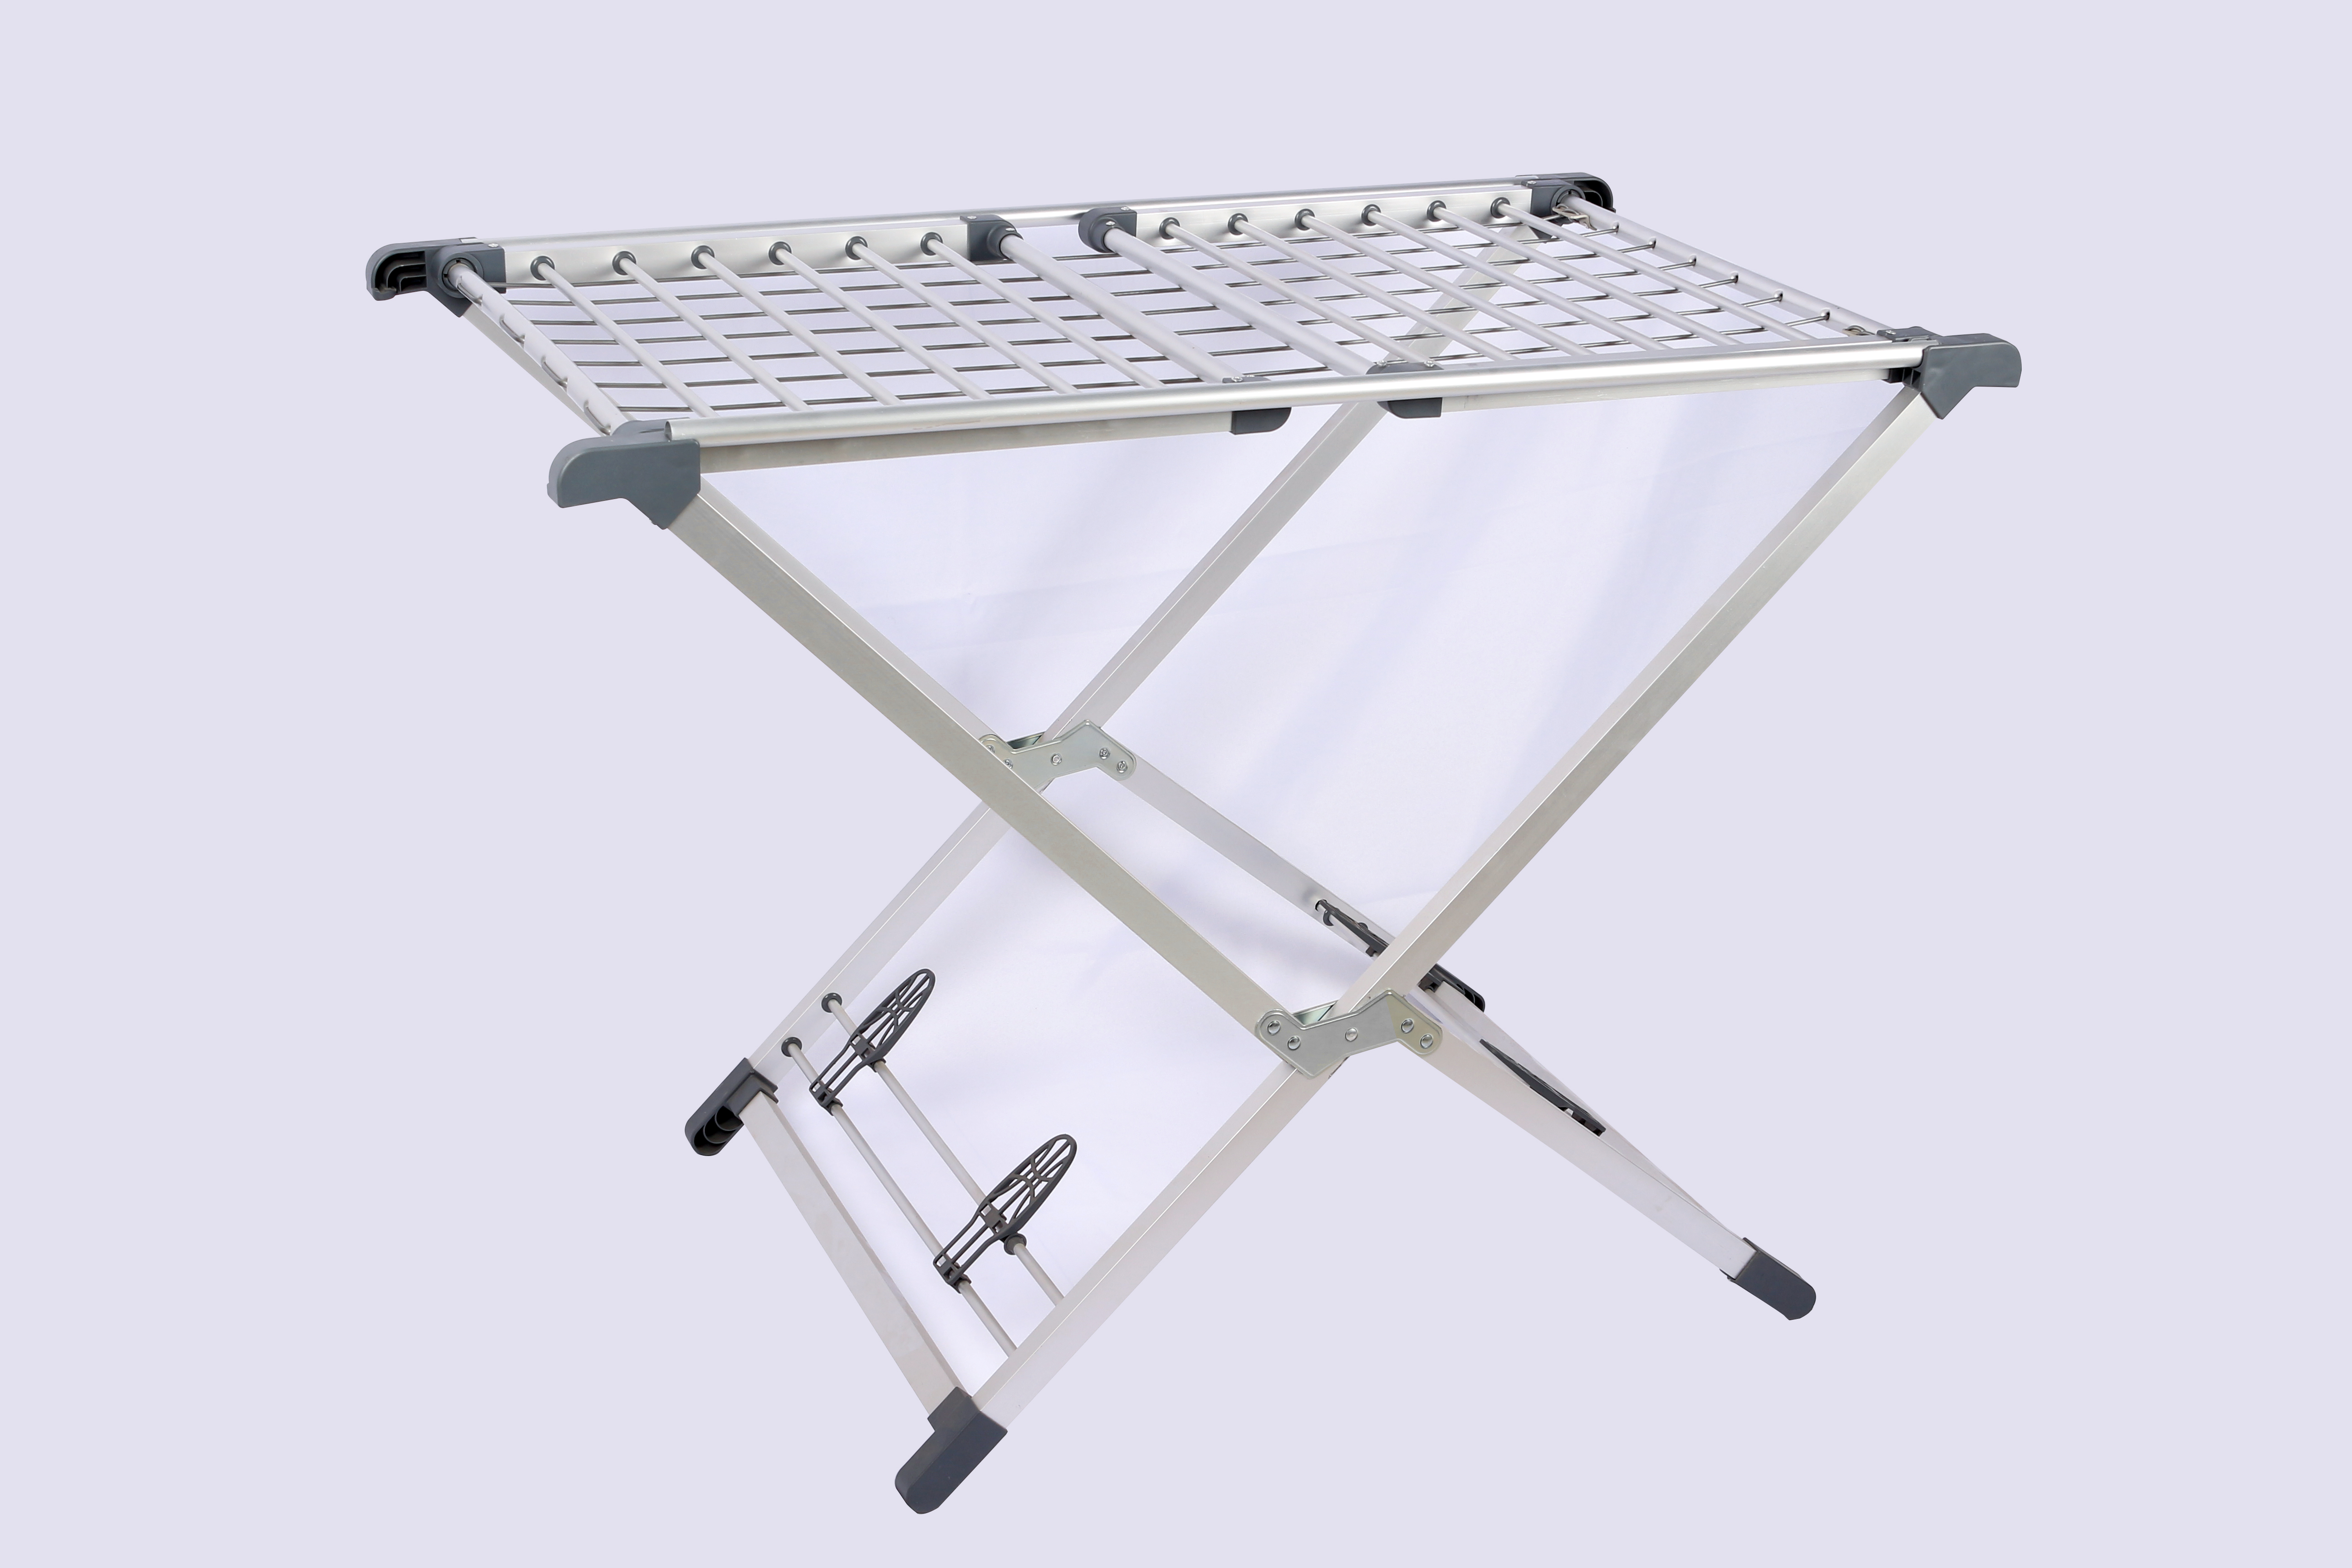 Wholesale foldable metal clothes drying rack for Clothes Drying in